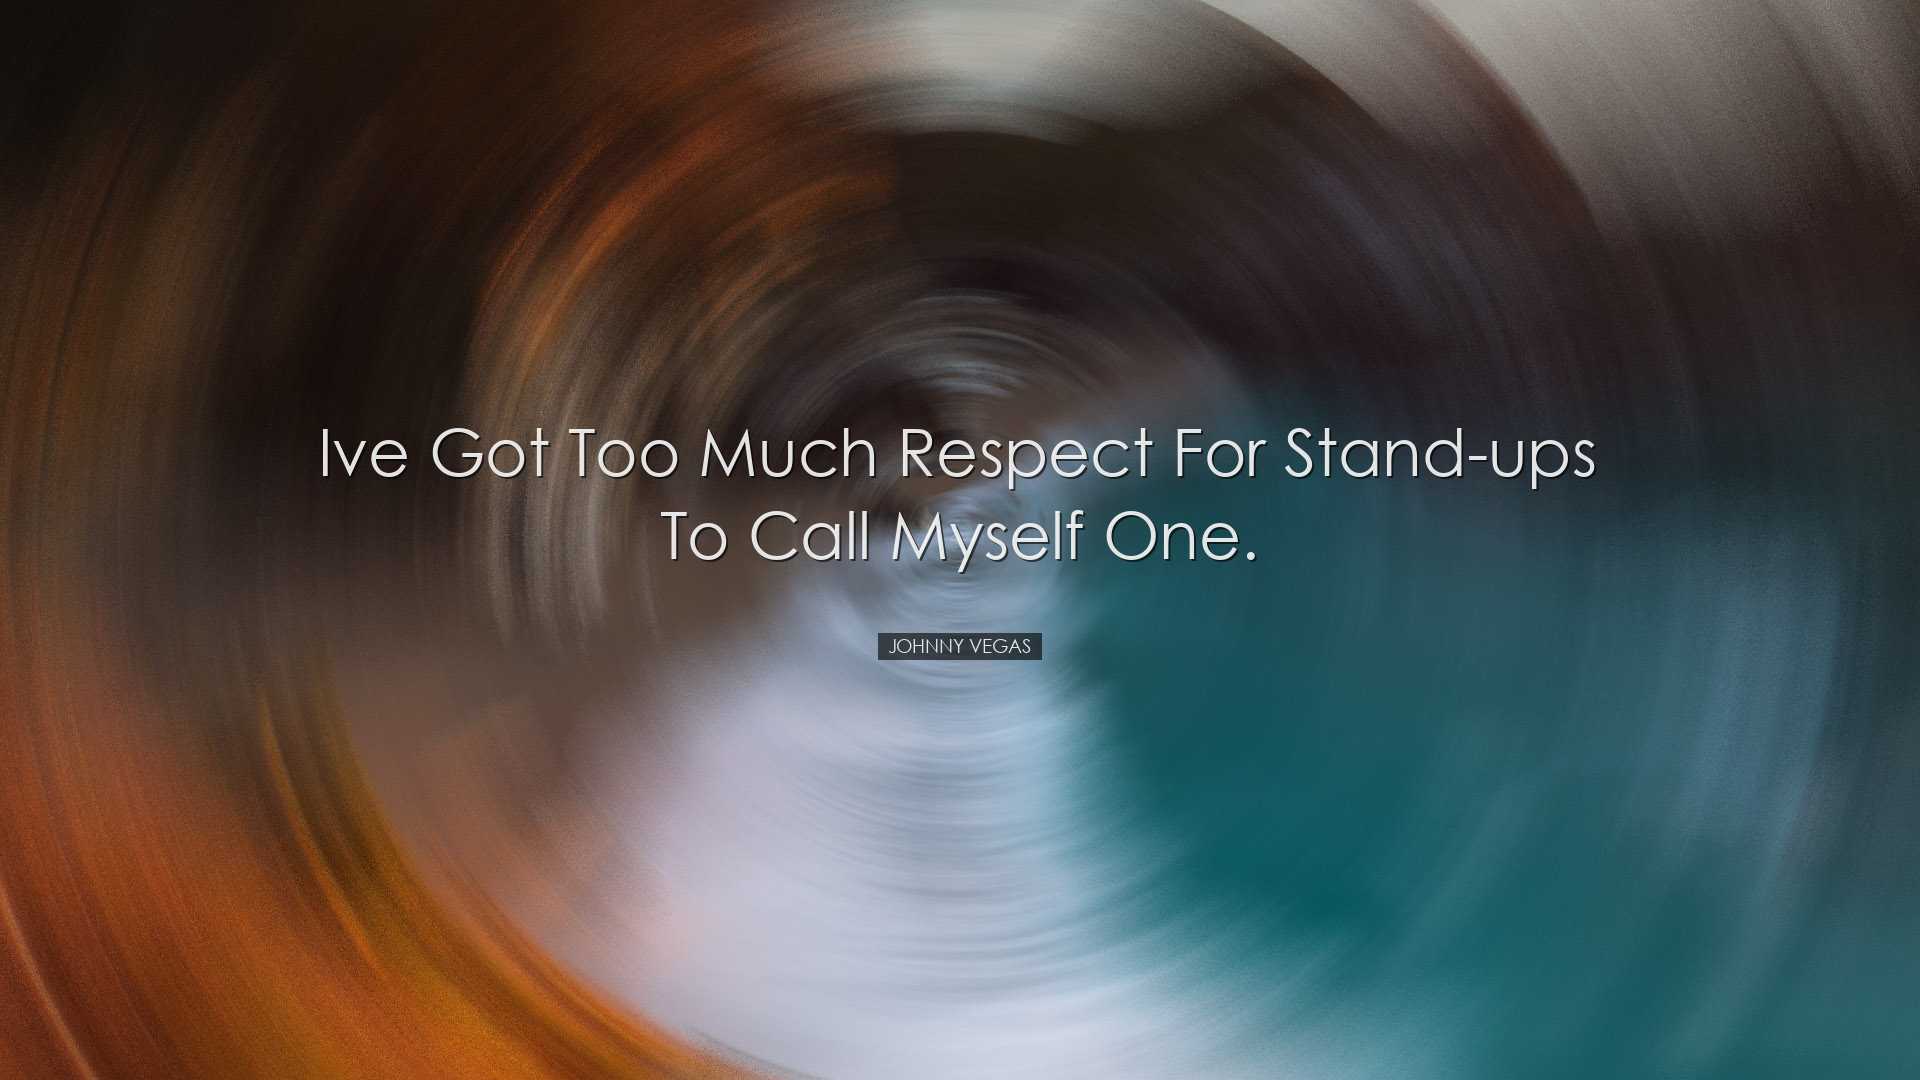 Ive got too much respect for stand-ups to call myself one. - Johnn